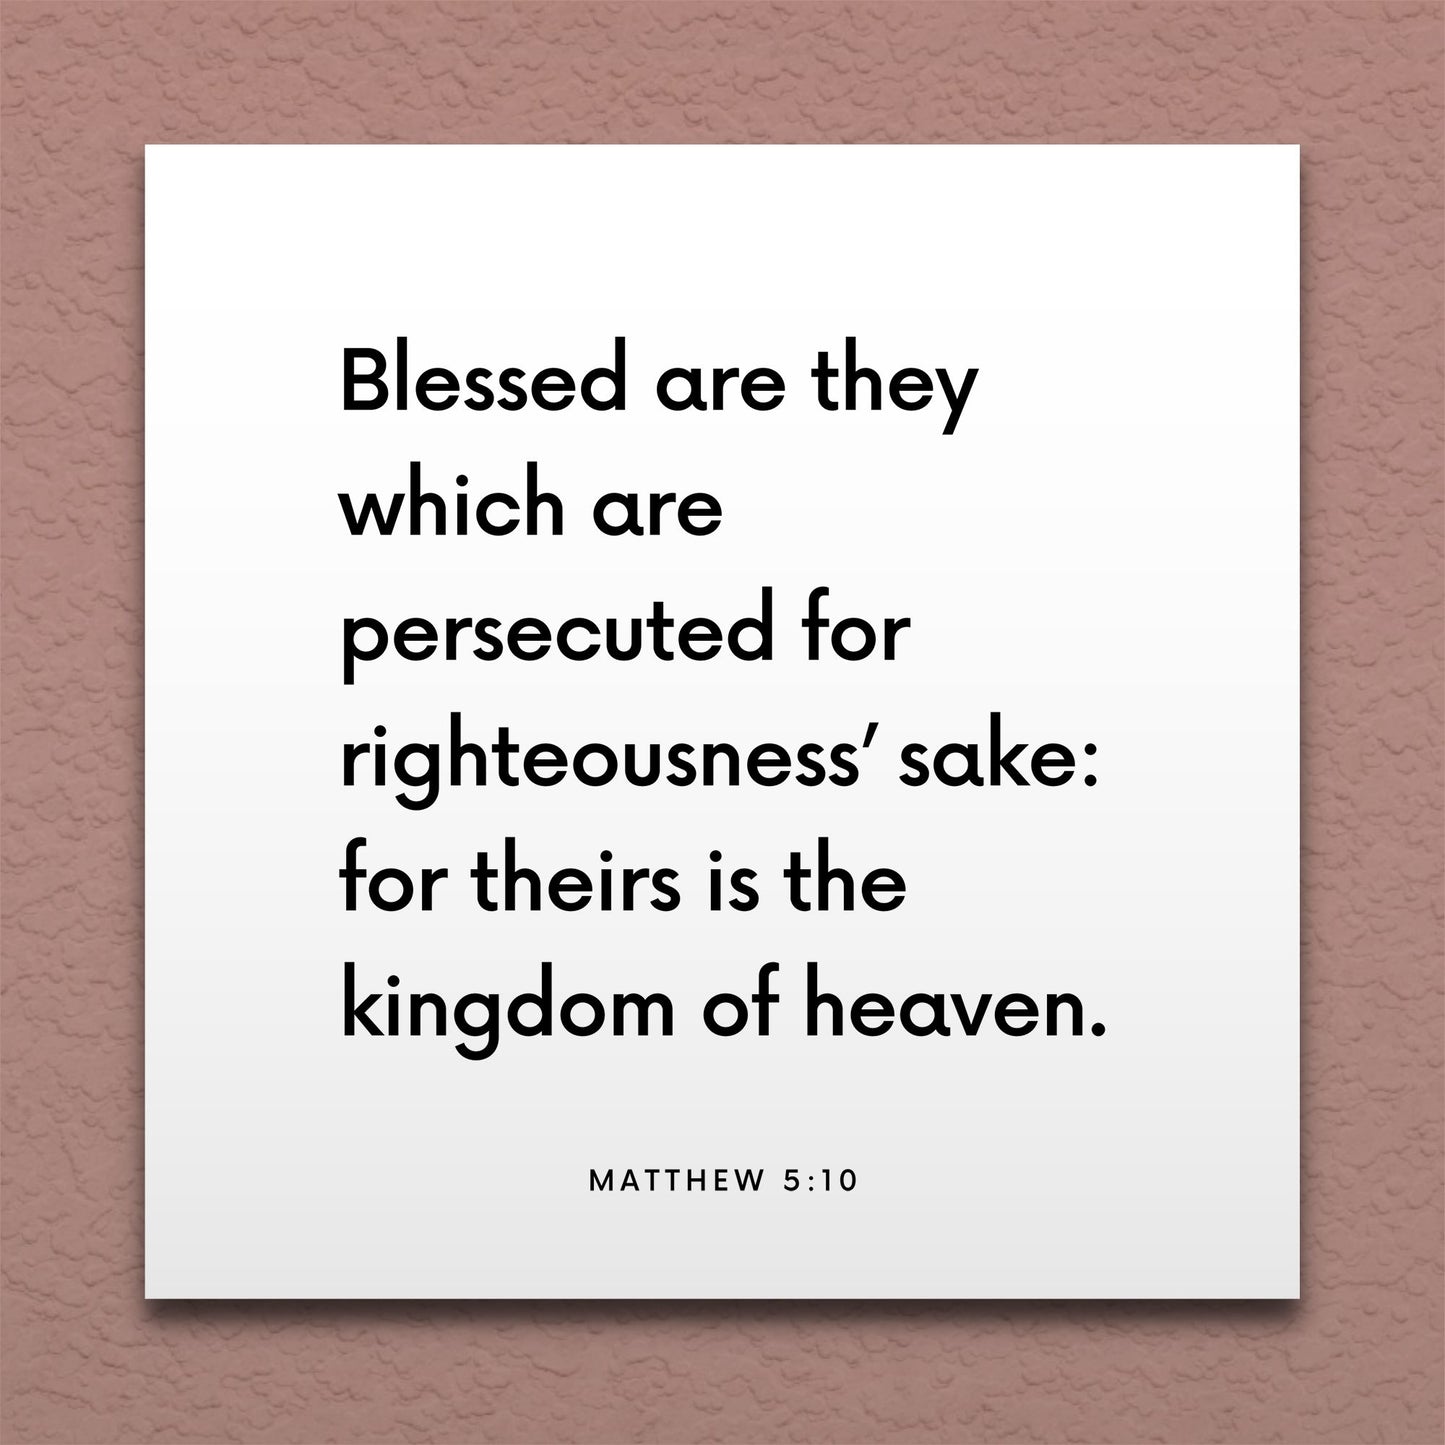 Wall-mounted scripture tile for Matthew 5:10 - "Blessed are they which are persecuted for righteousness"